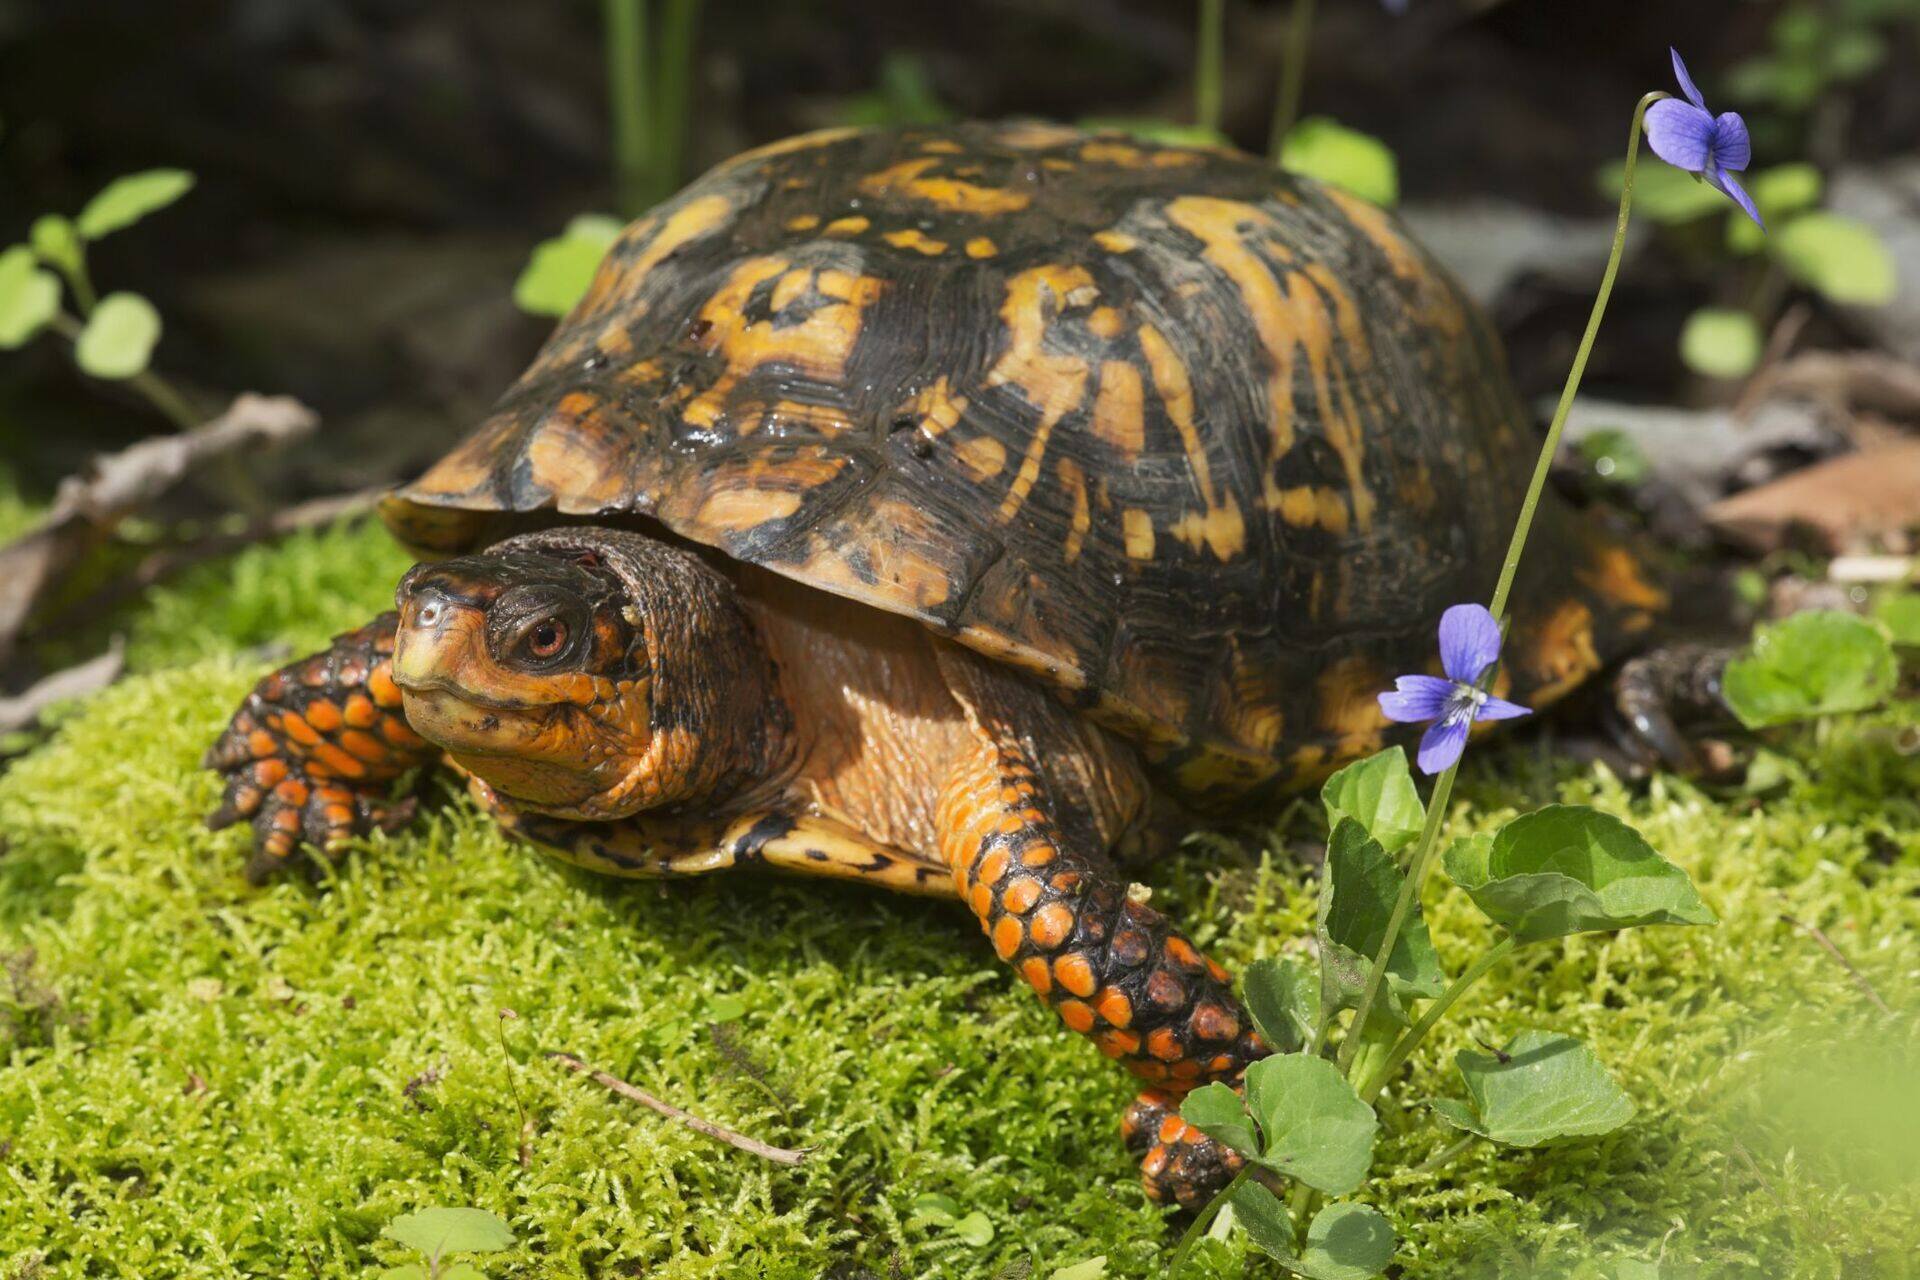 How To Make An Outdoor Turtle Habitat